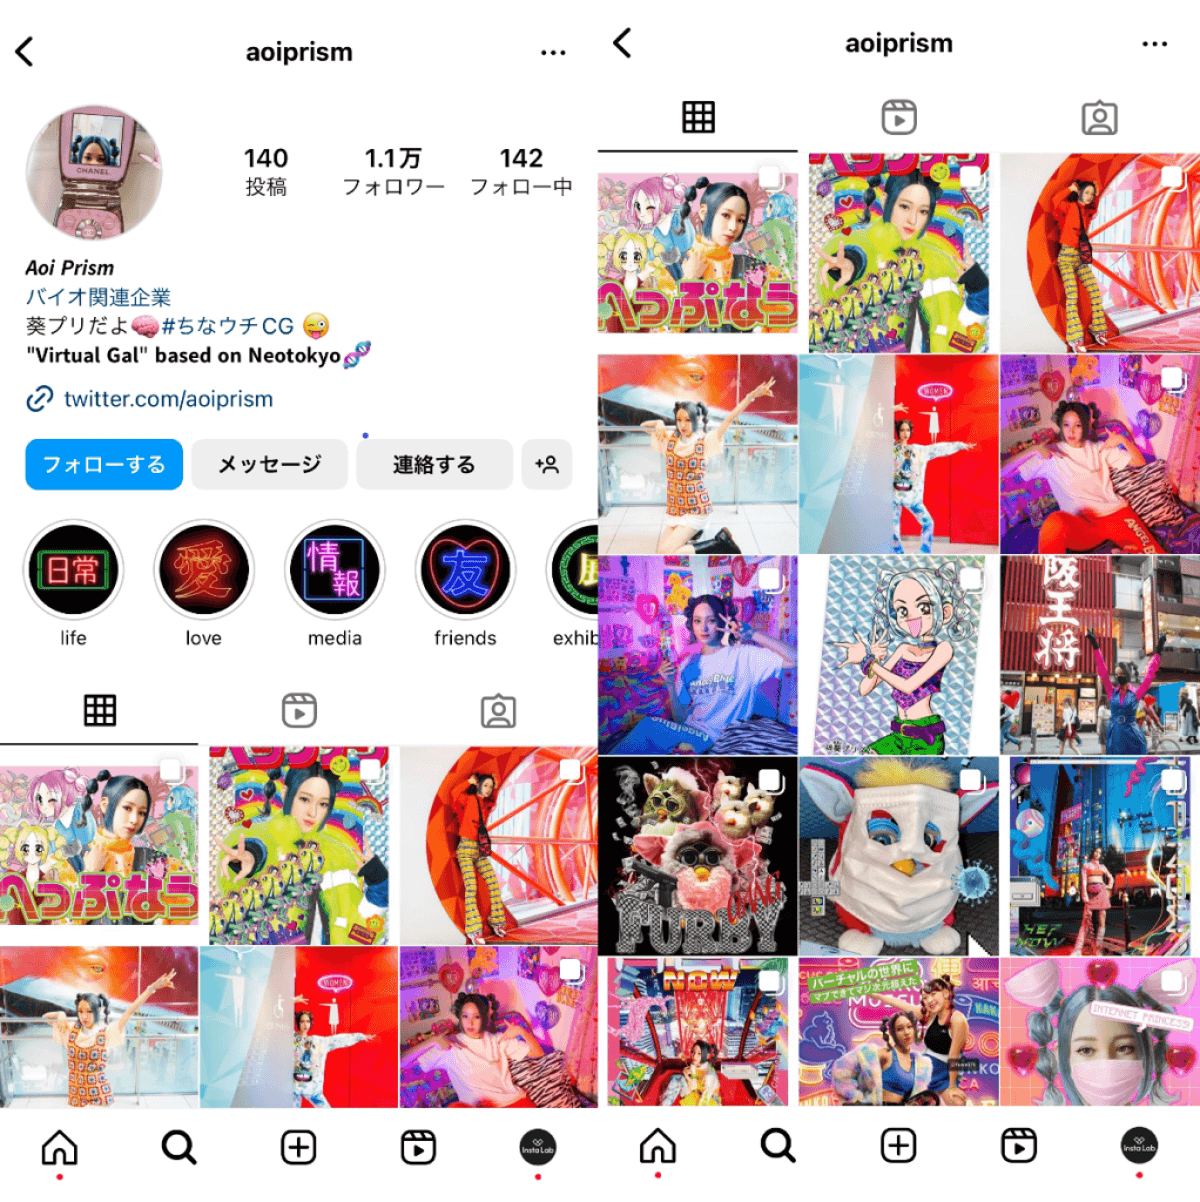 instagram-account-aoiprism